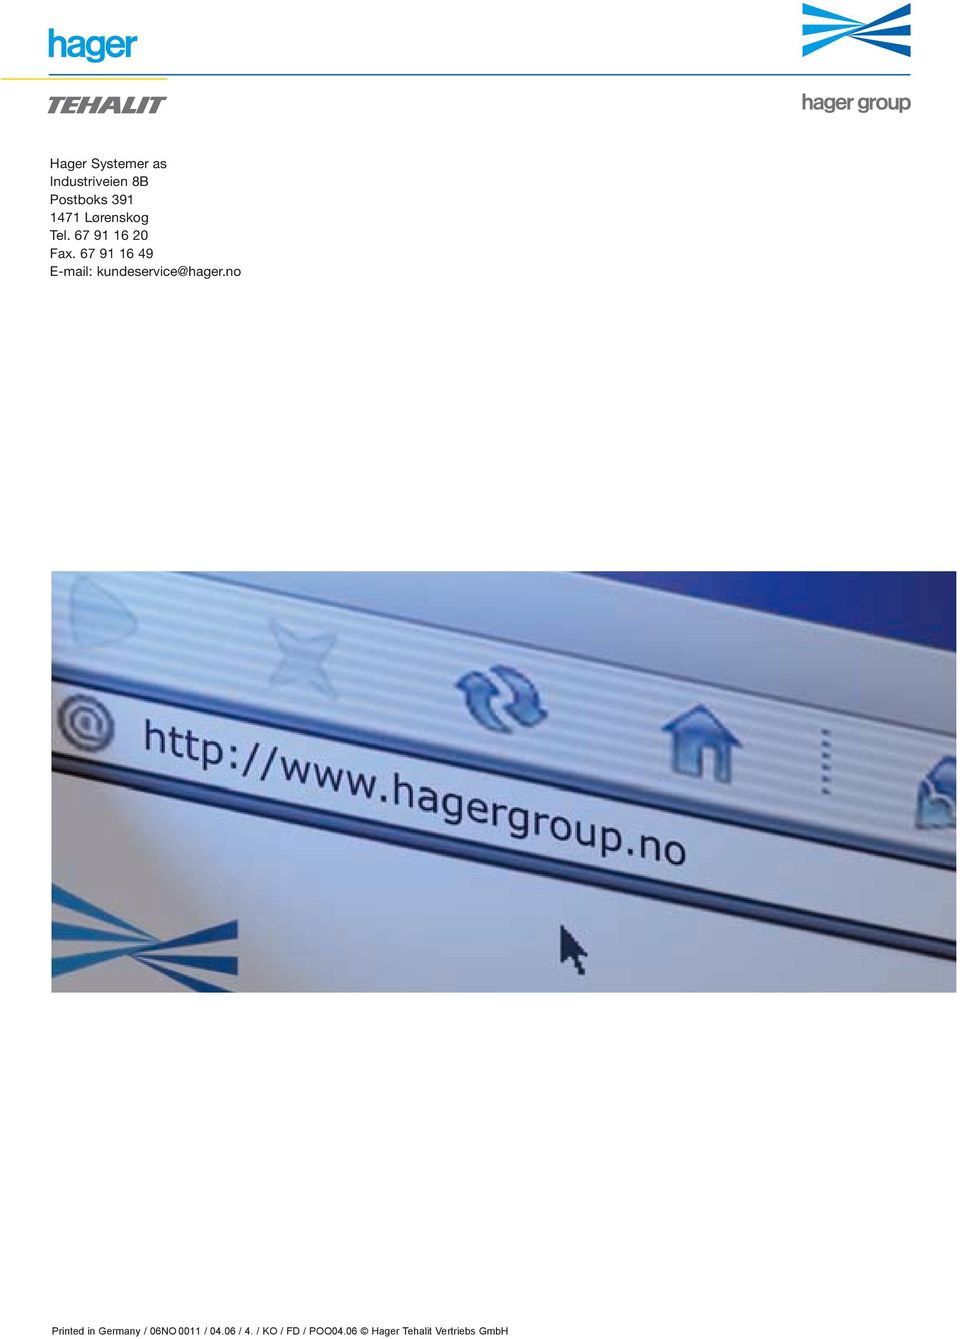 67 91 16 49 E-mail: kundeservice@hager.